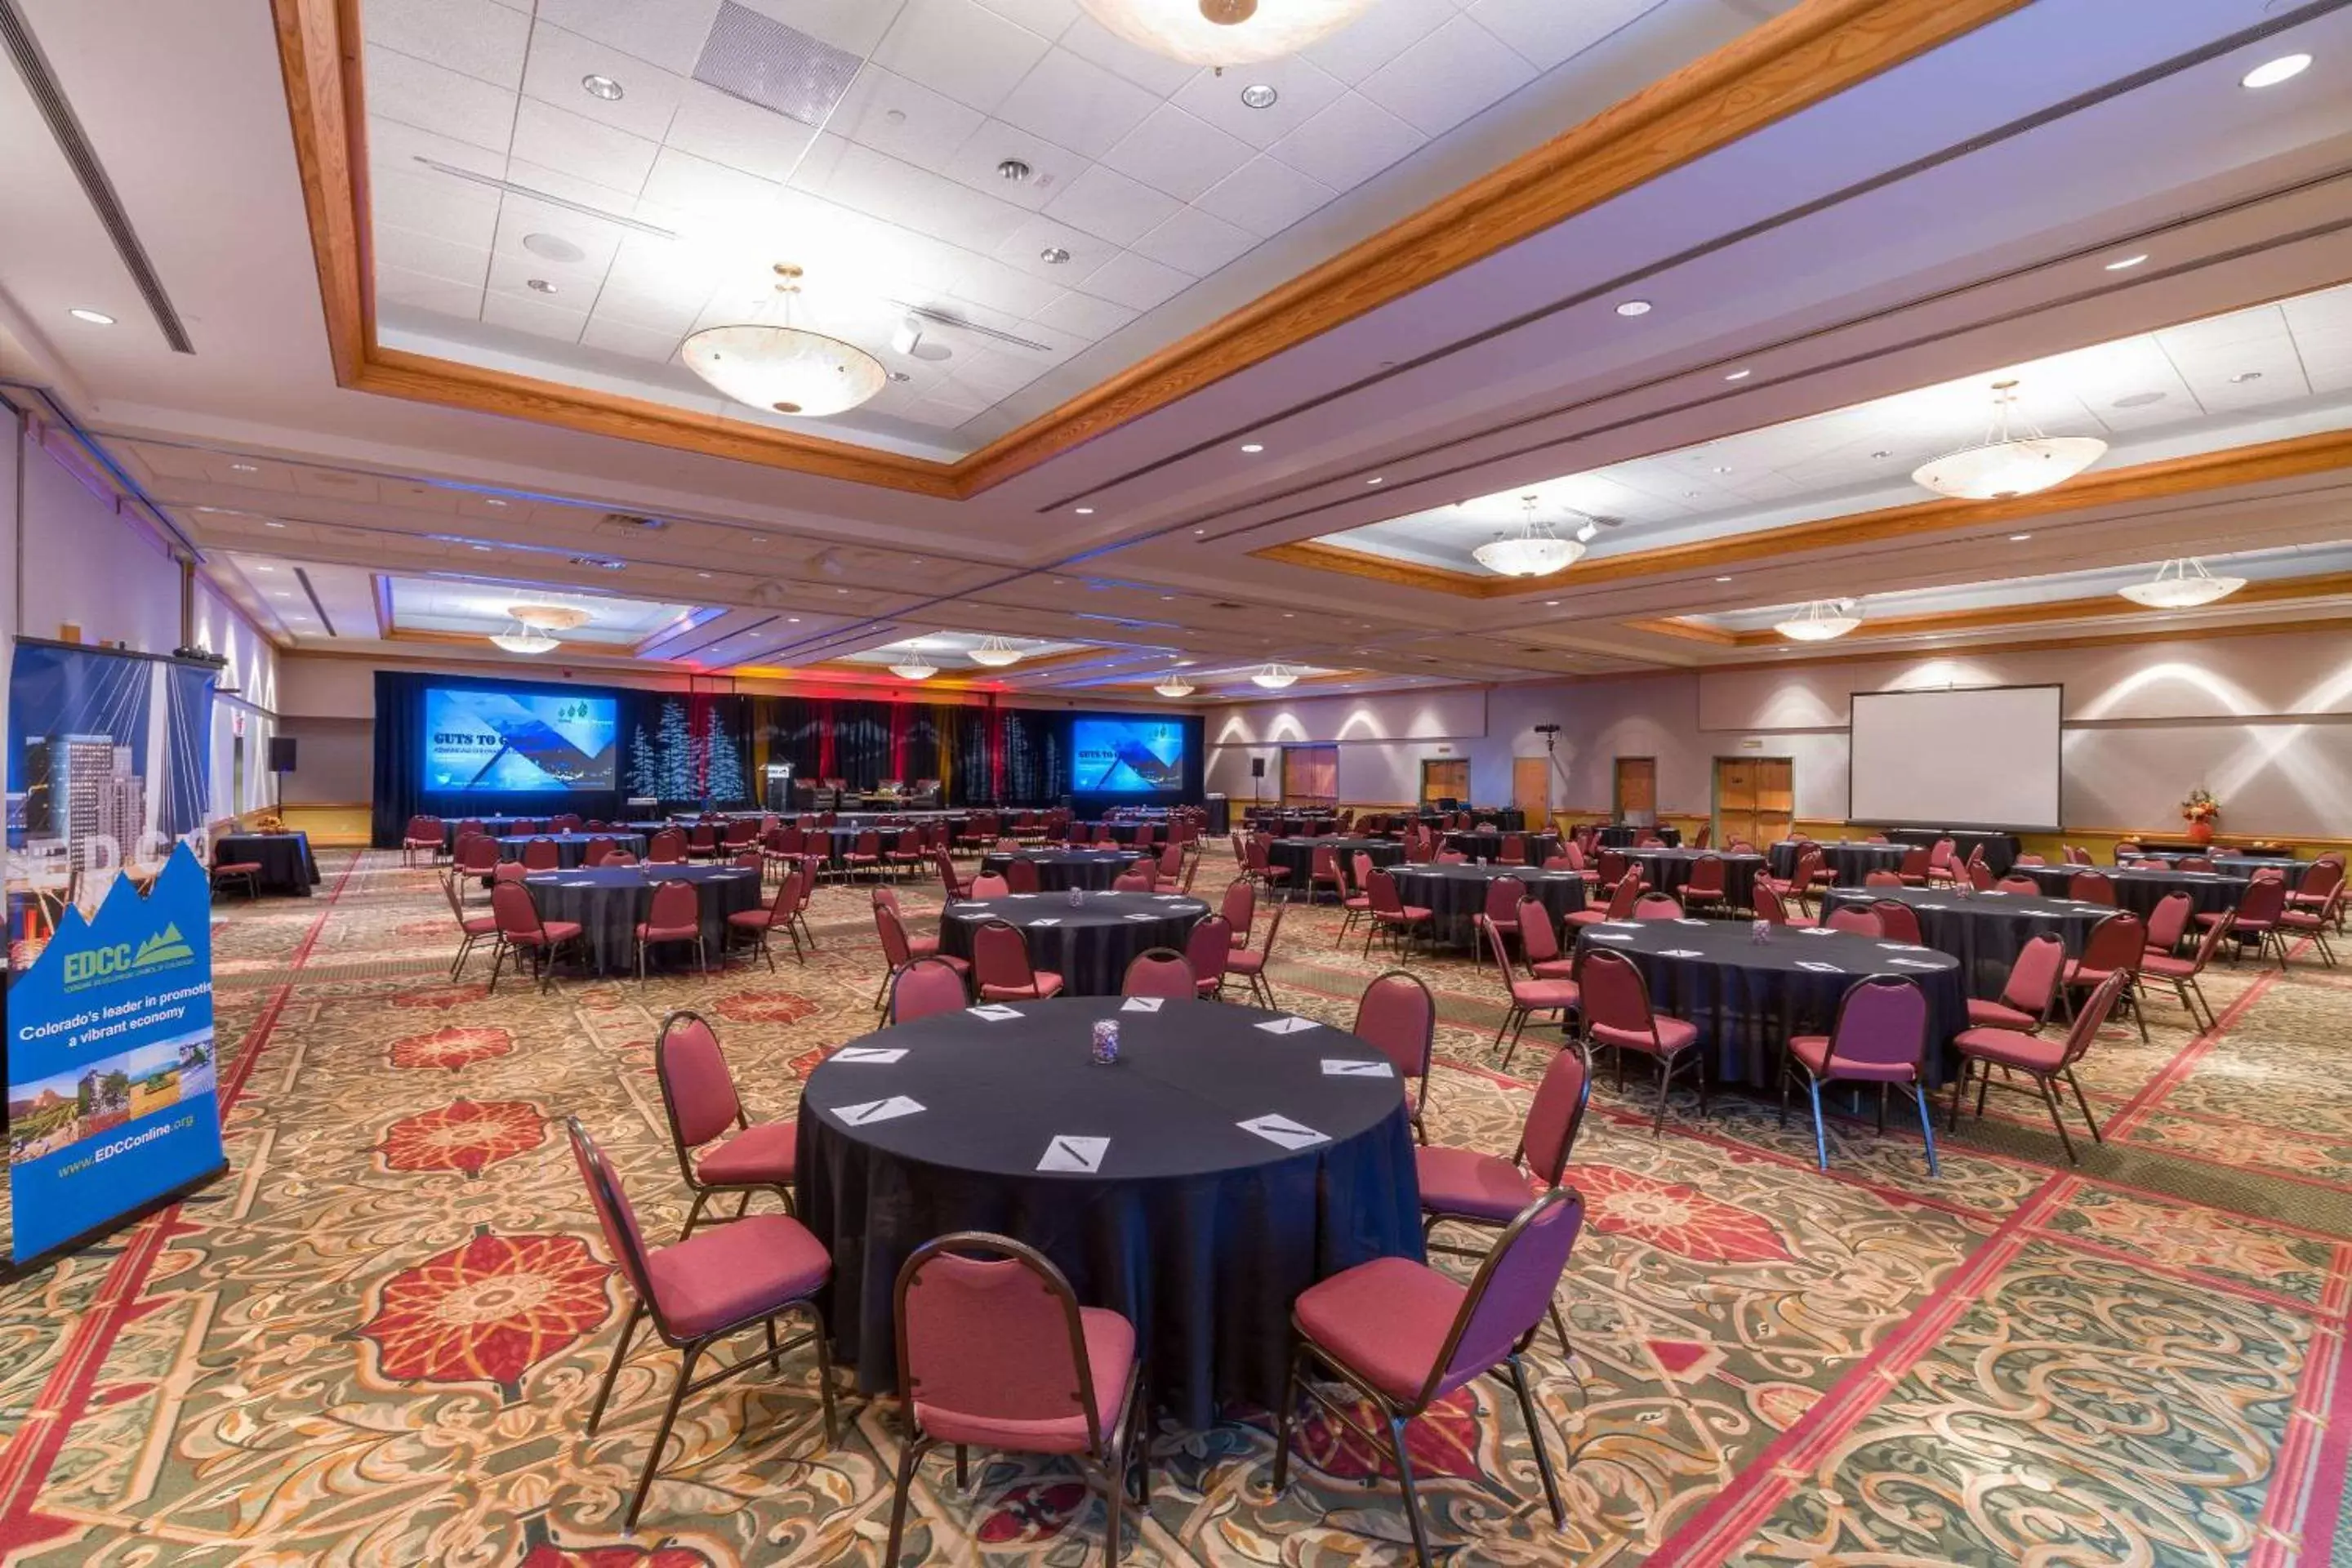 On site, Banquet Facilities in The Ridgeline Hotel, Estes Park, Ascend Hotel Collection